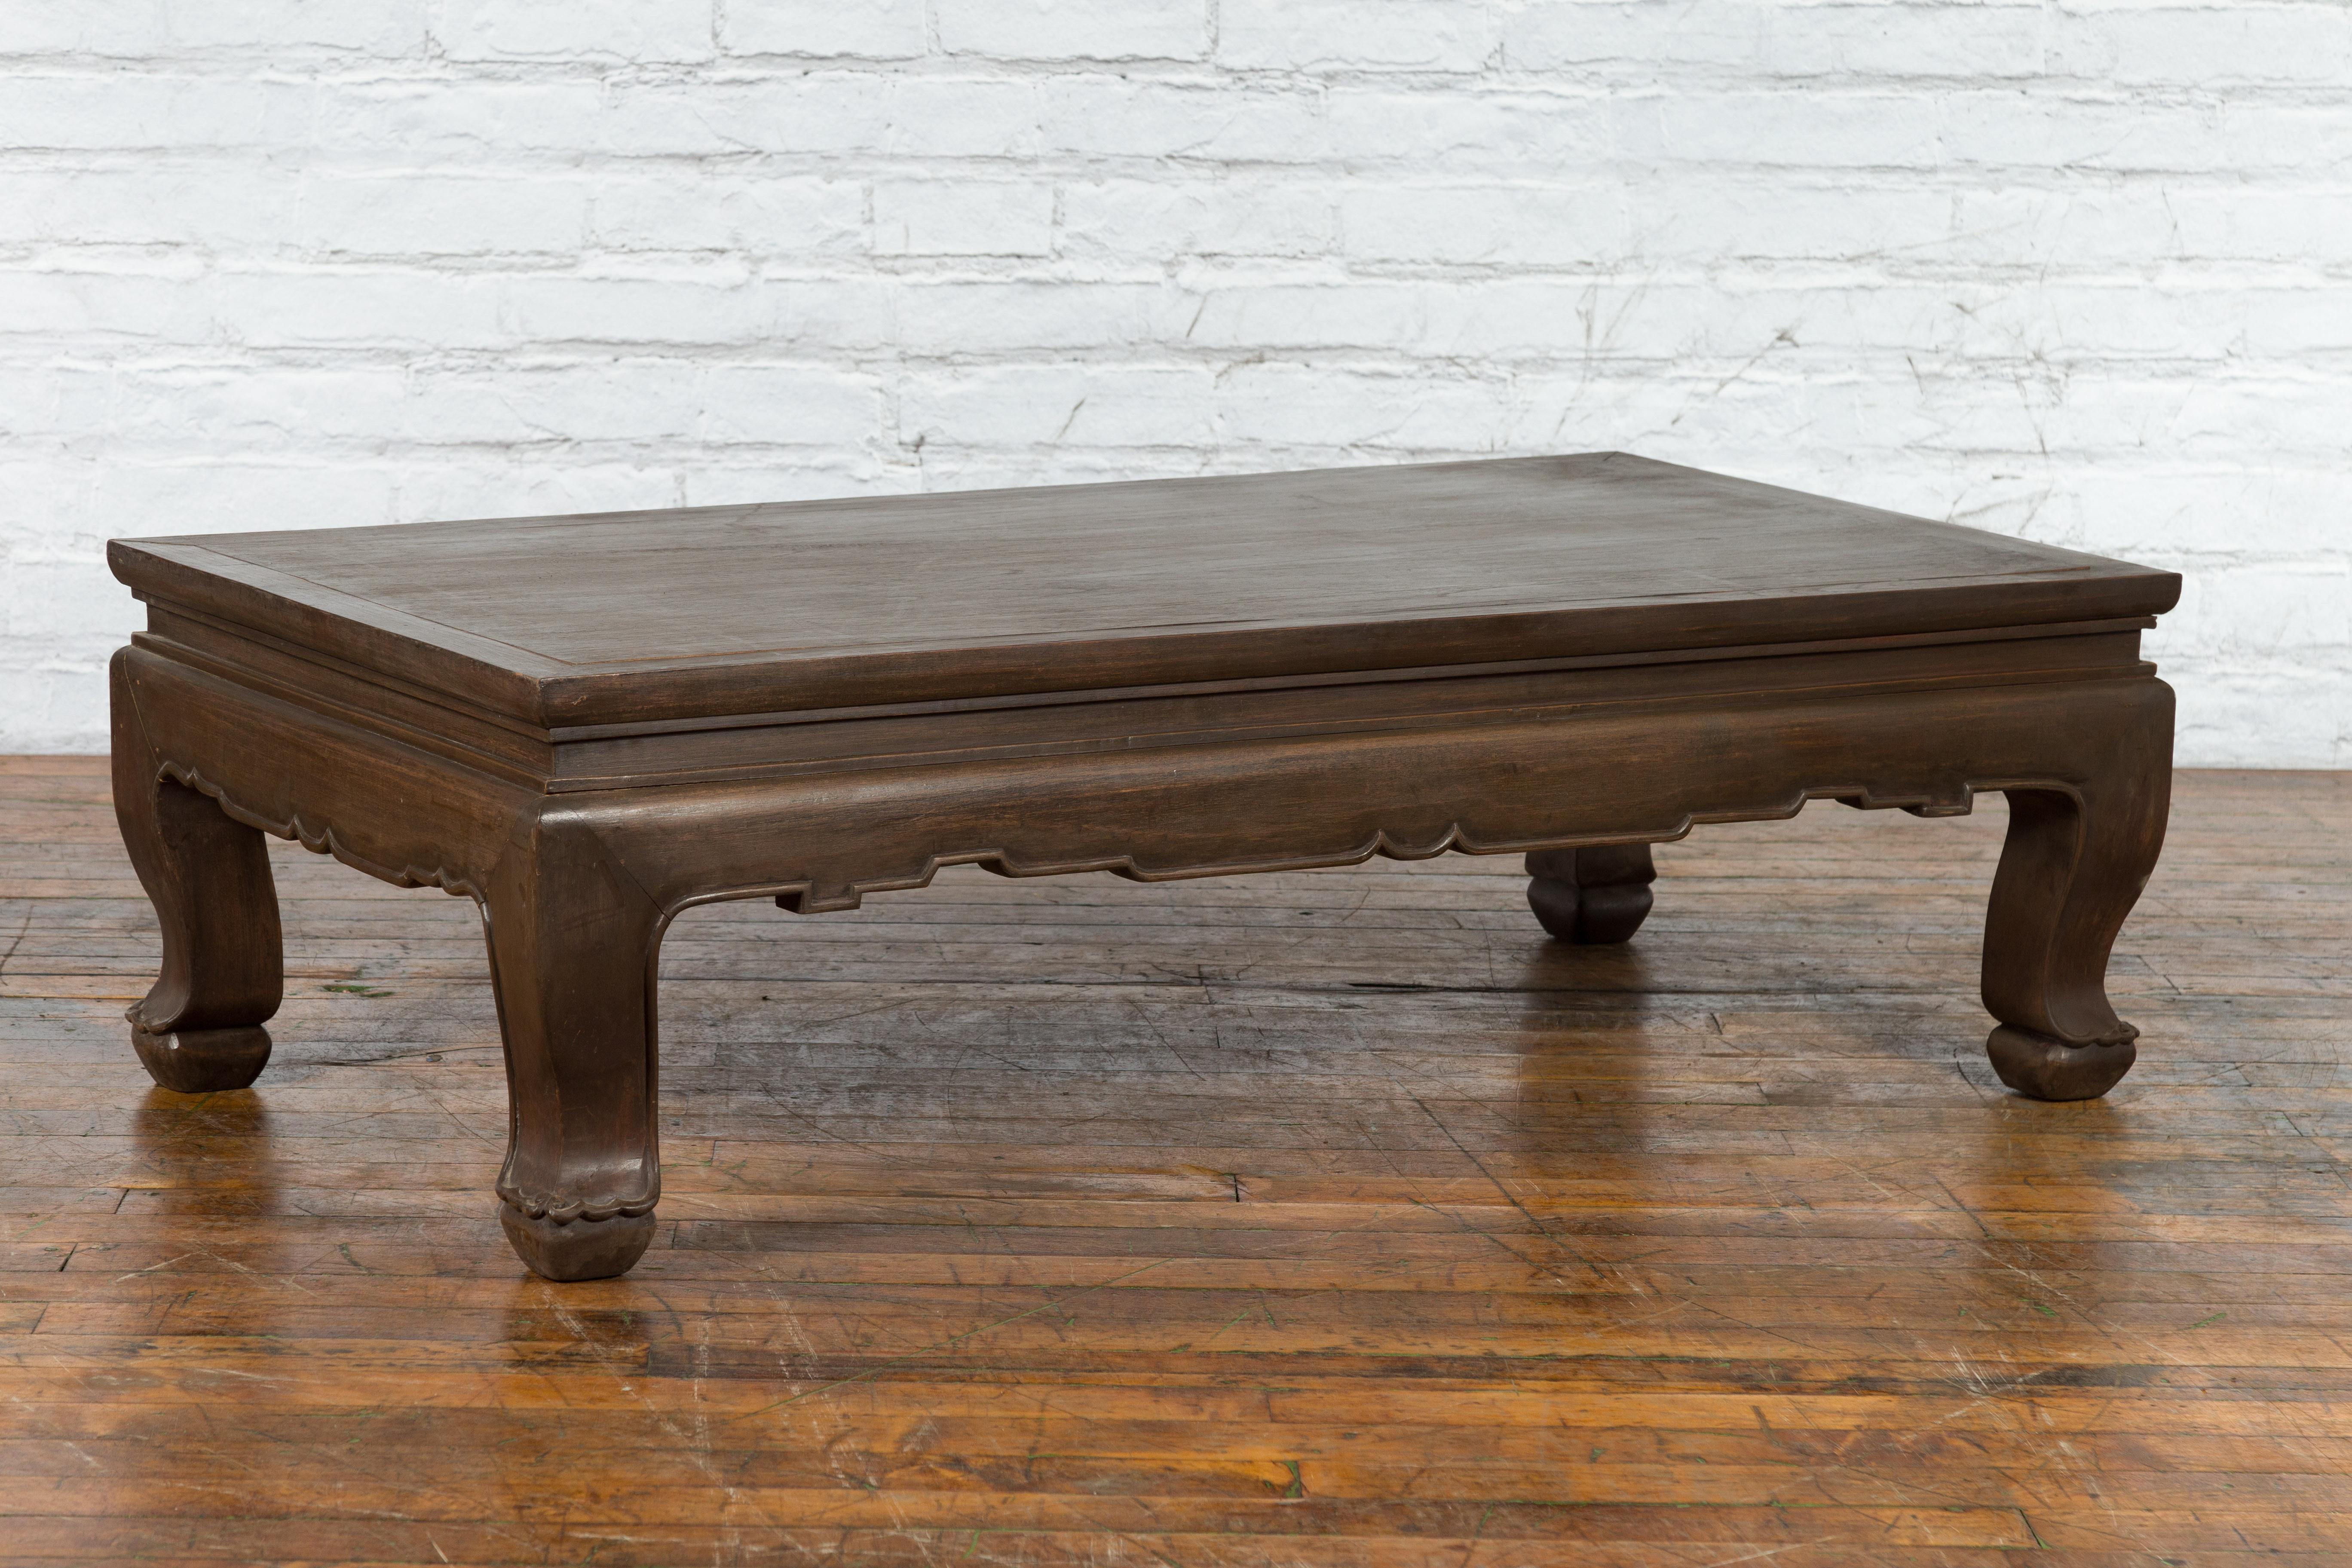 A vintage Thai teak wood coffee table from the mid 20th century with carved apron, cabriole legs, brown patina and petite feet. Created in Thailand during the Midcentury period, this teak wood coffee table features a rectangular top with central